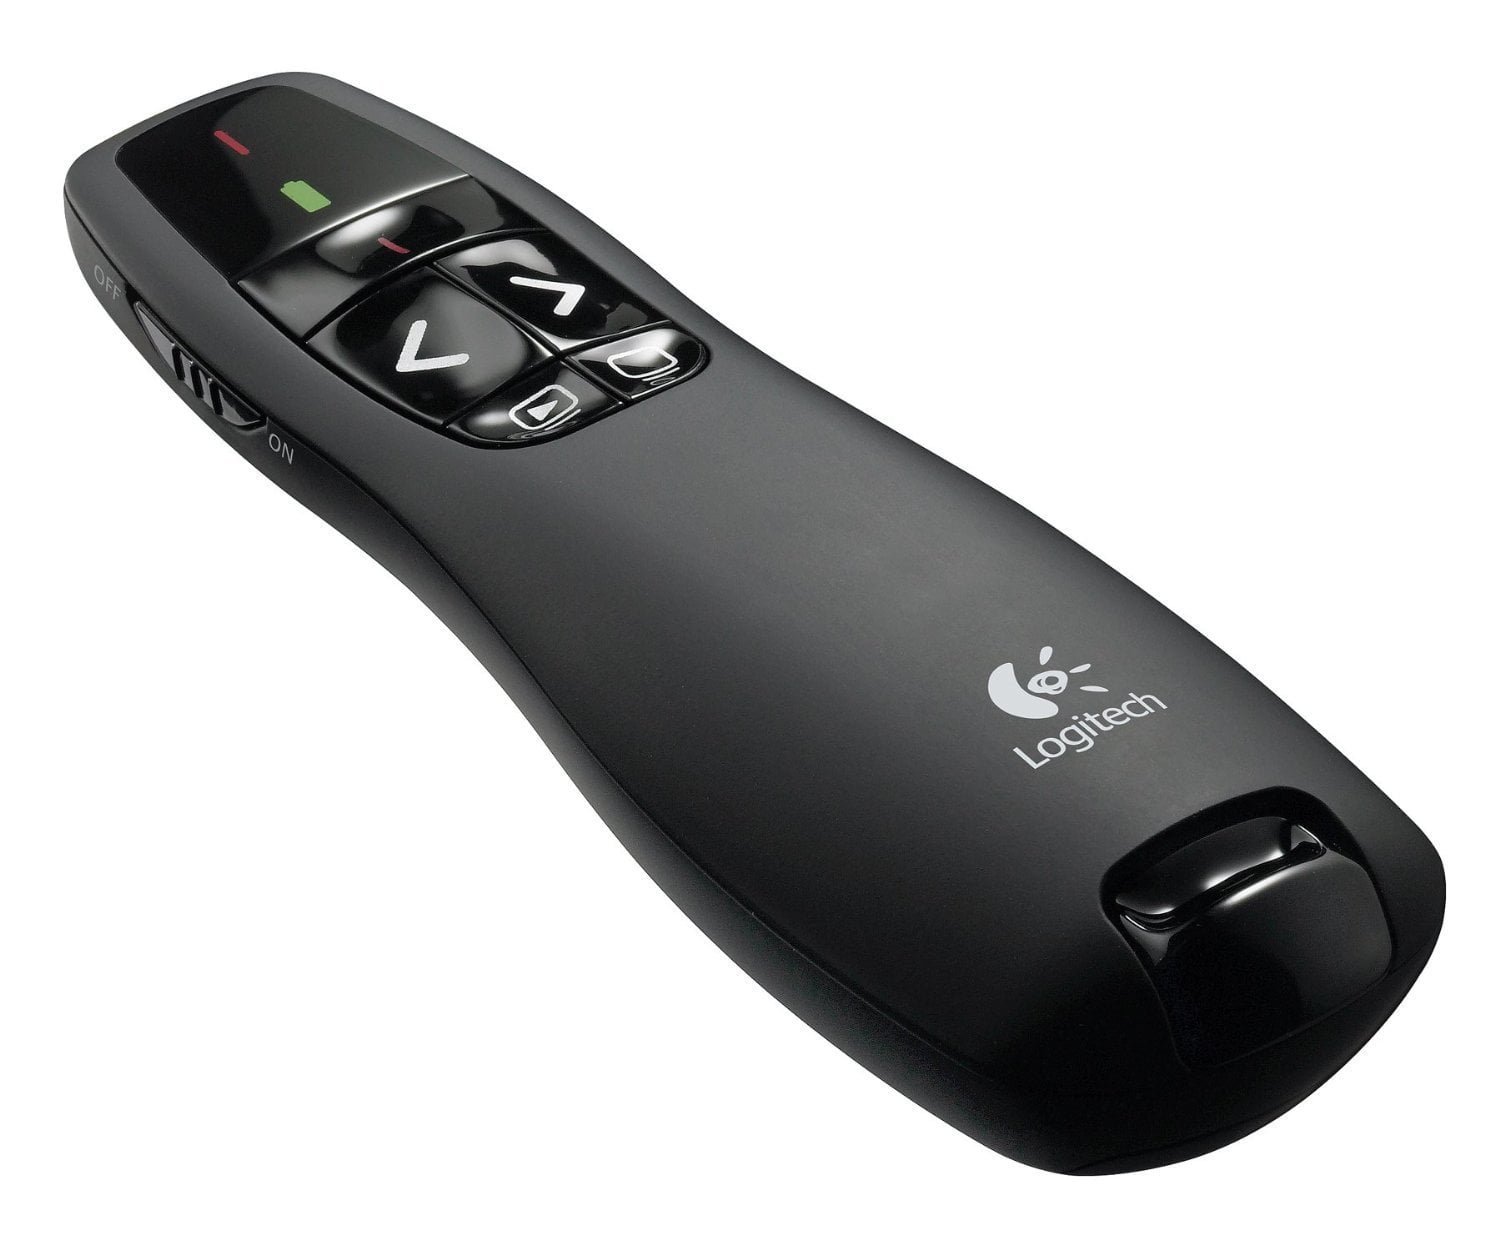 Intuitive Touch-Keys for Slideshow Control with Red Laser Pointer 2.4GHz RF Up to 100 Ft Range Professional Presentation Remote Rechargeable Black Universal Compatibility Wireless Presenter V9 